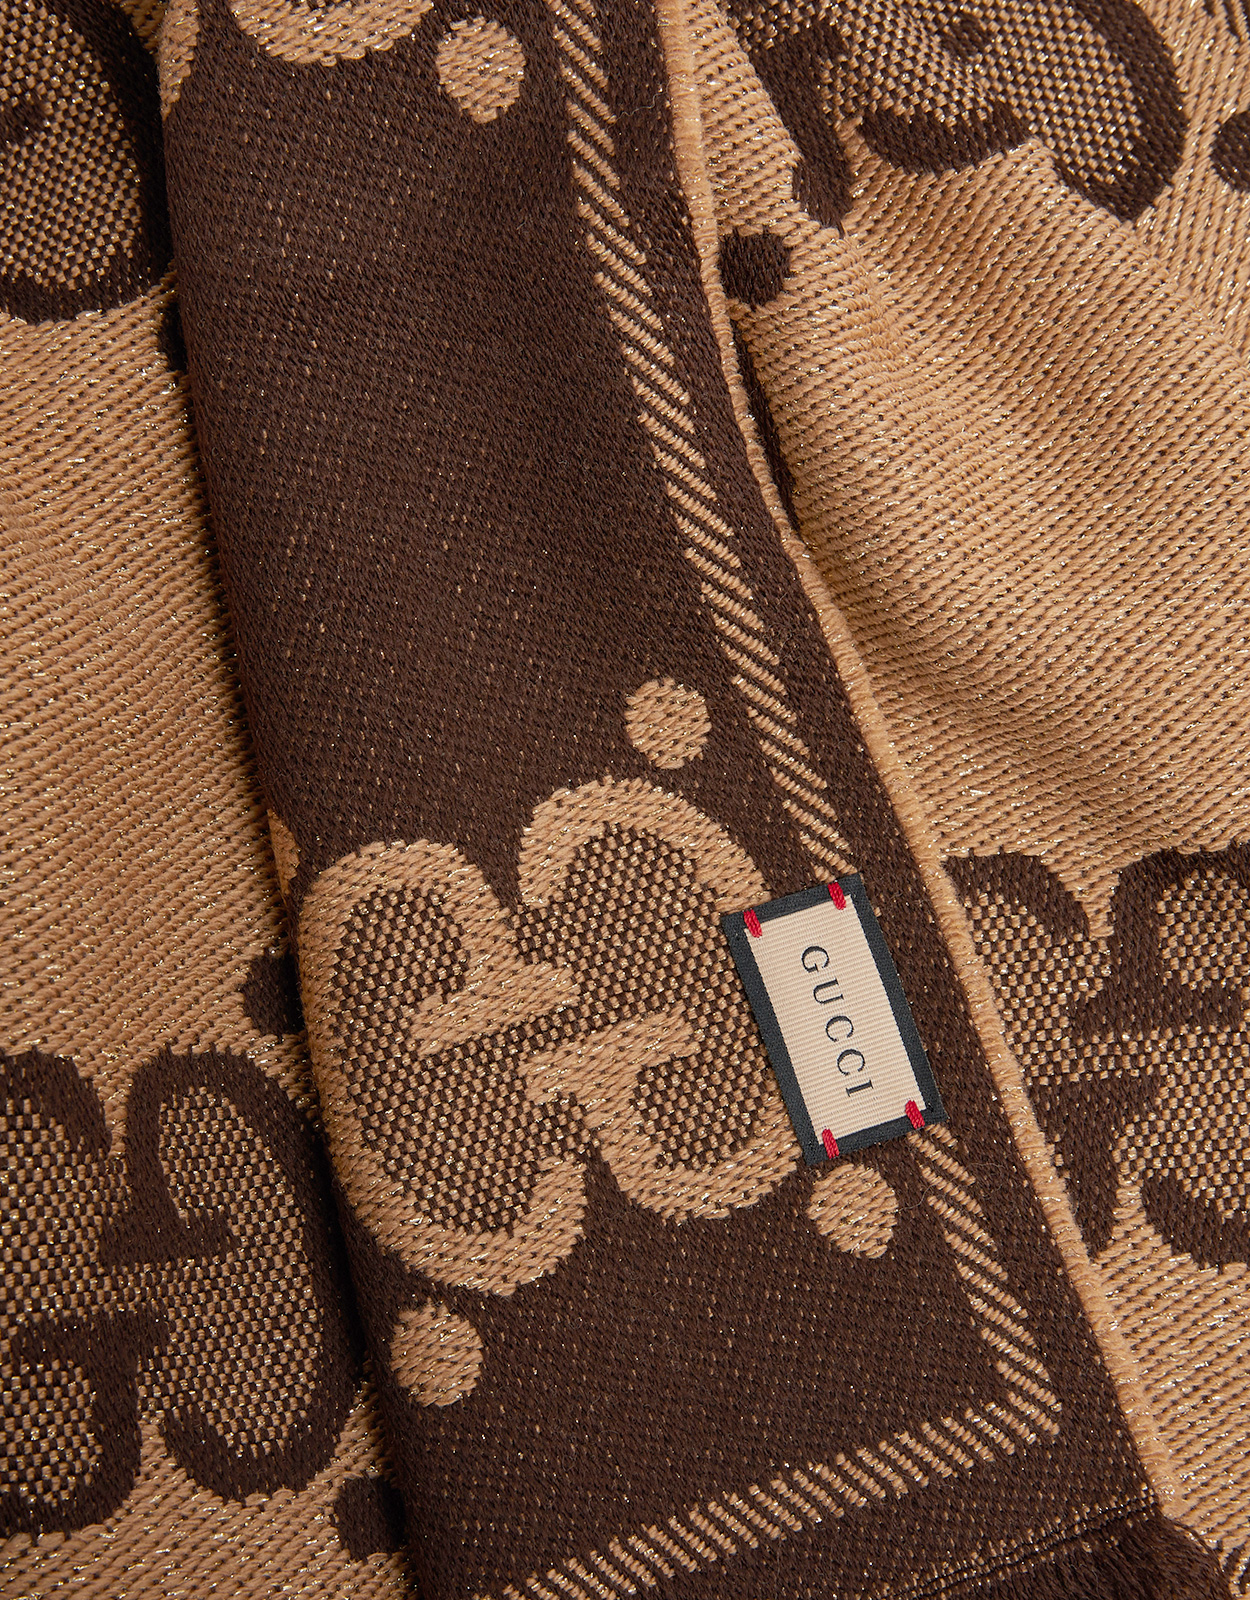 GG wool scarf in brown and beige